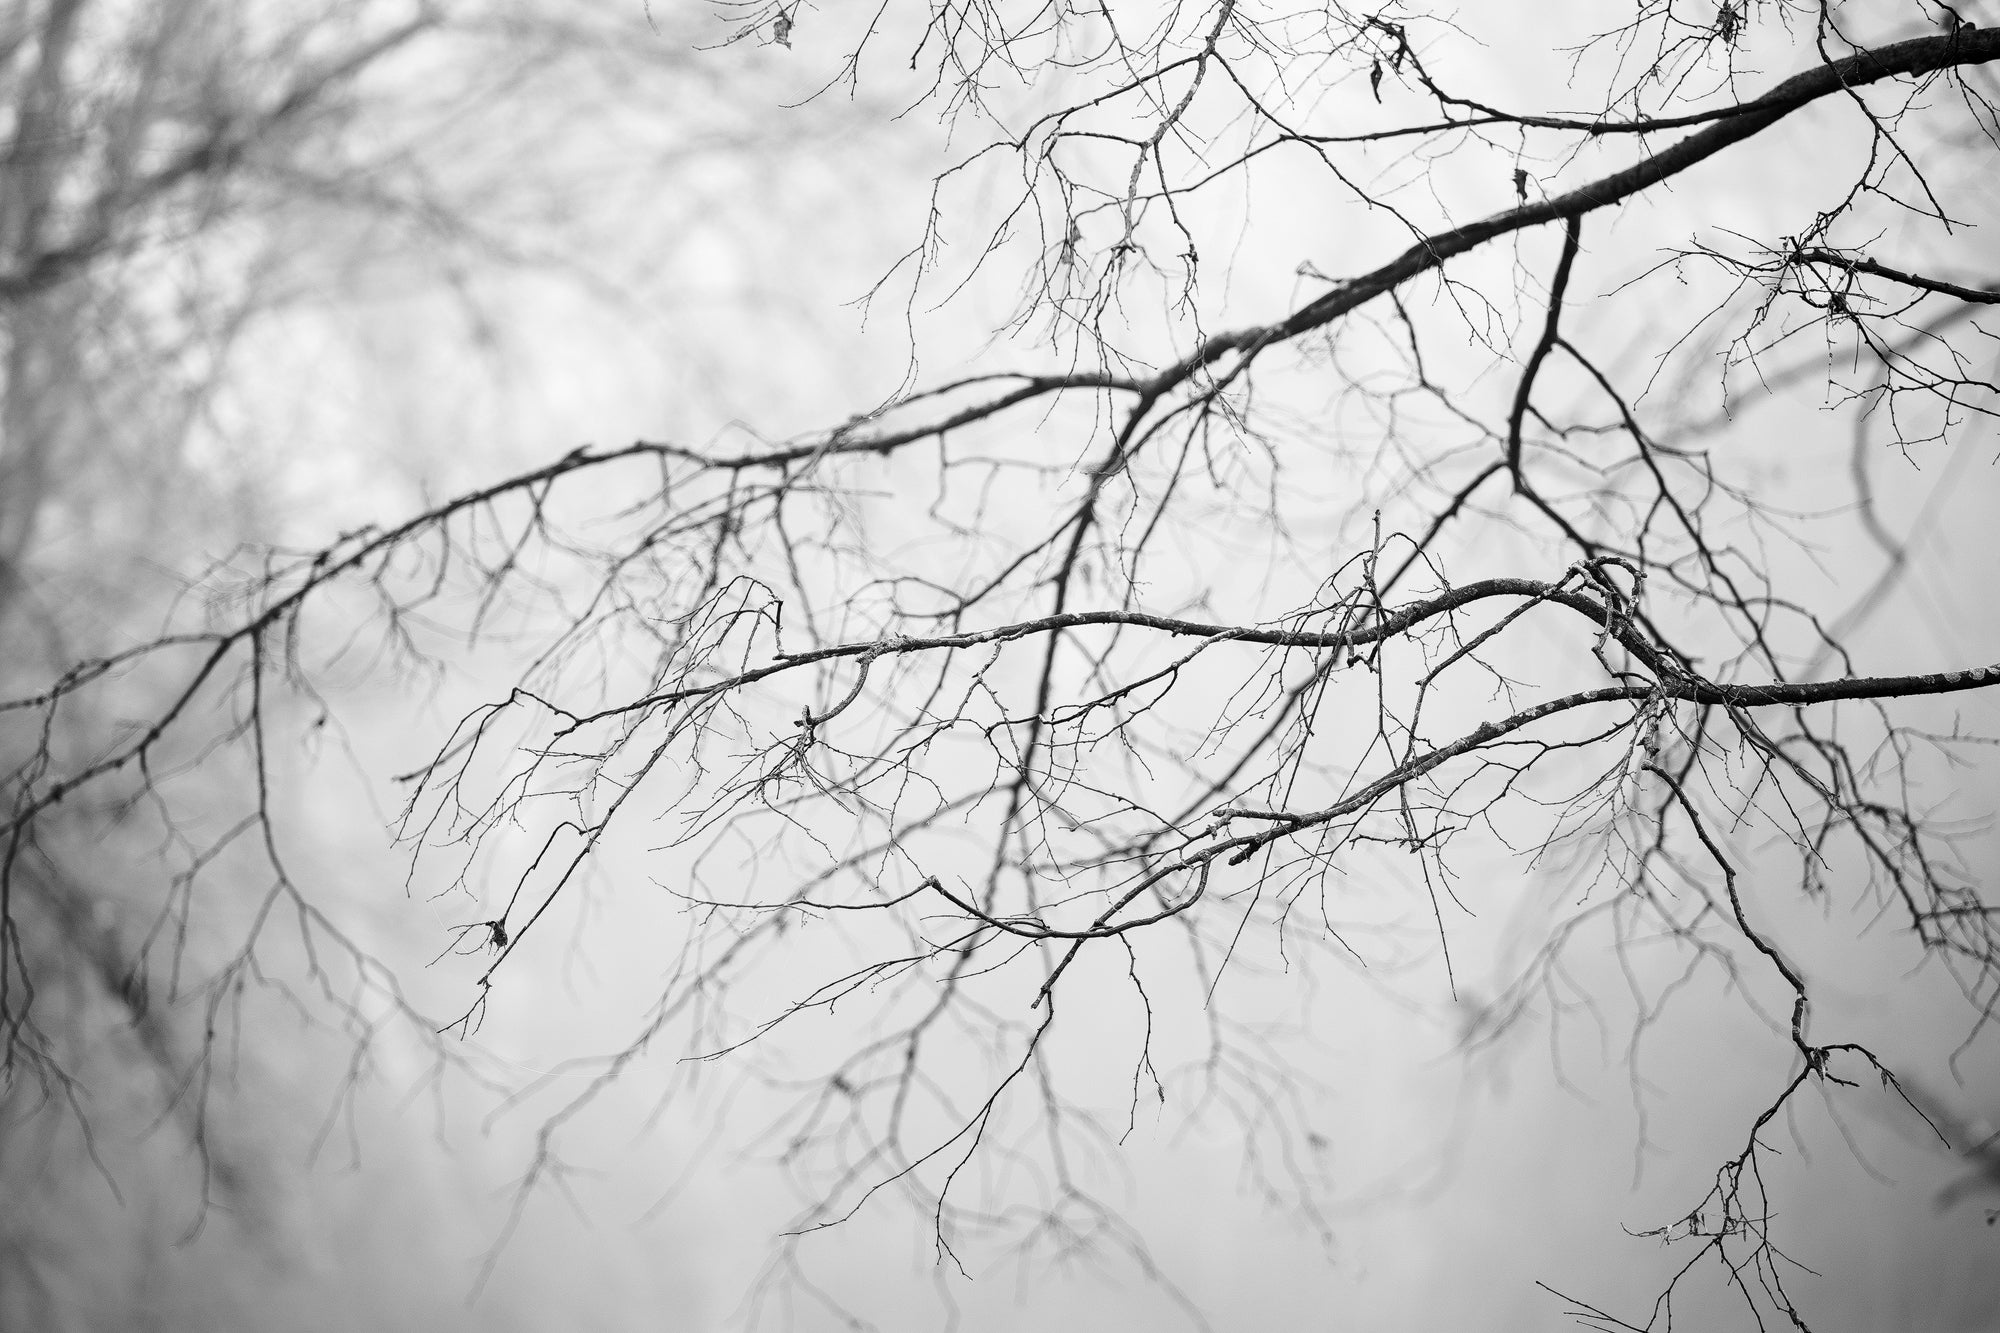 Winter Branches - Black and White Landscape Photograph by Keith Dotson. Click to buy a fine art print.